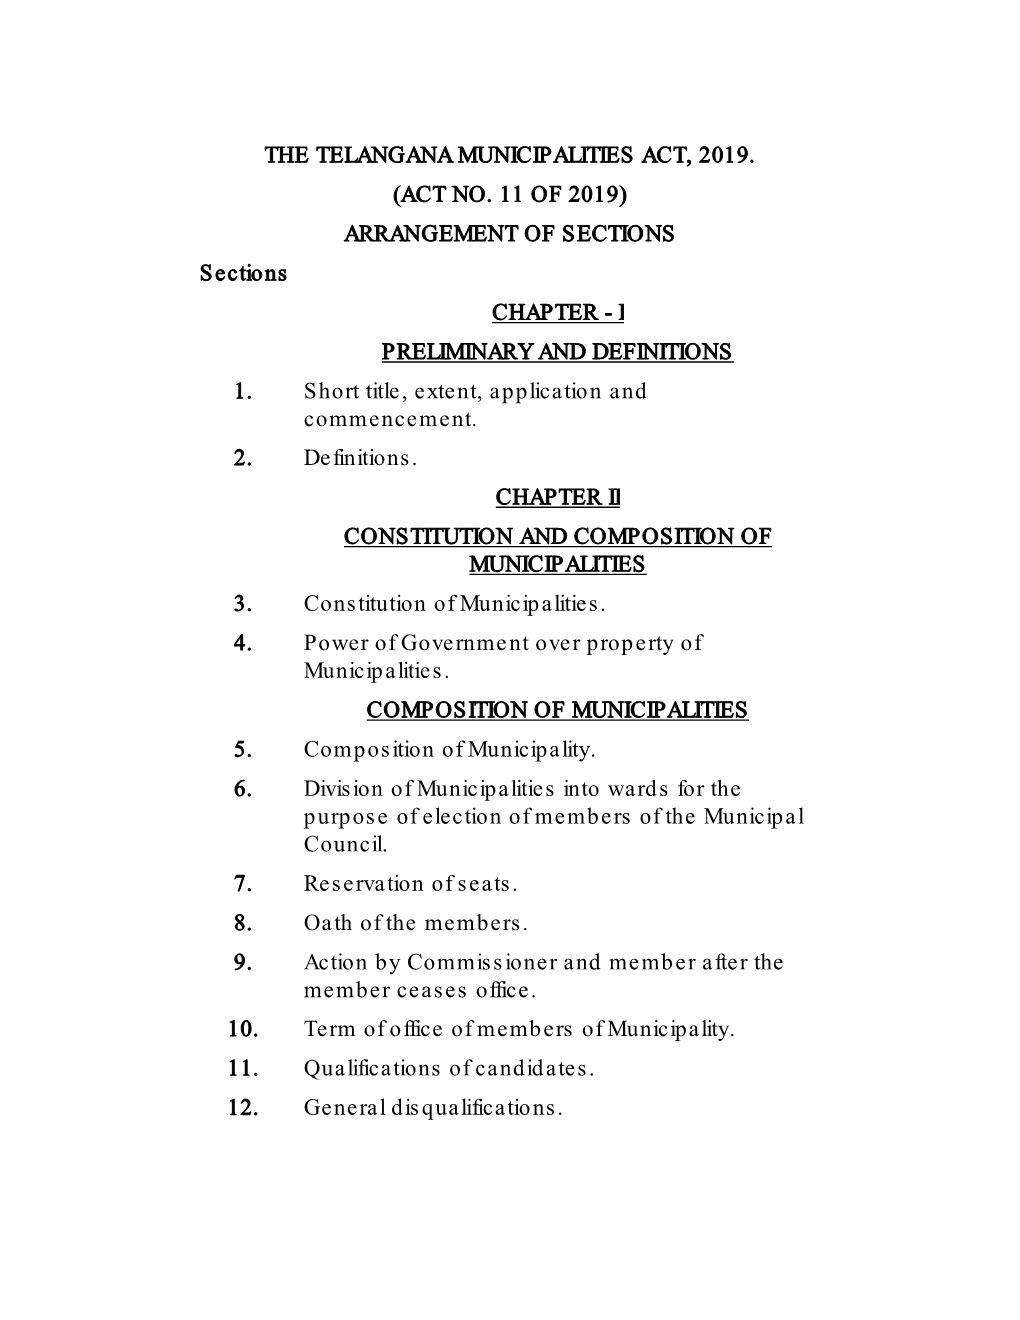 THE TELANGANA MUNICIPALITIES ACT, 2019. (ACT NO. 11 of 2019) ARRANGEMENT of SECTIONS Sections CHAPTER - I PRELIMINARY and DEFINITIONS 1